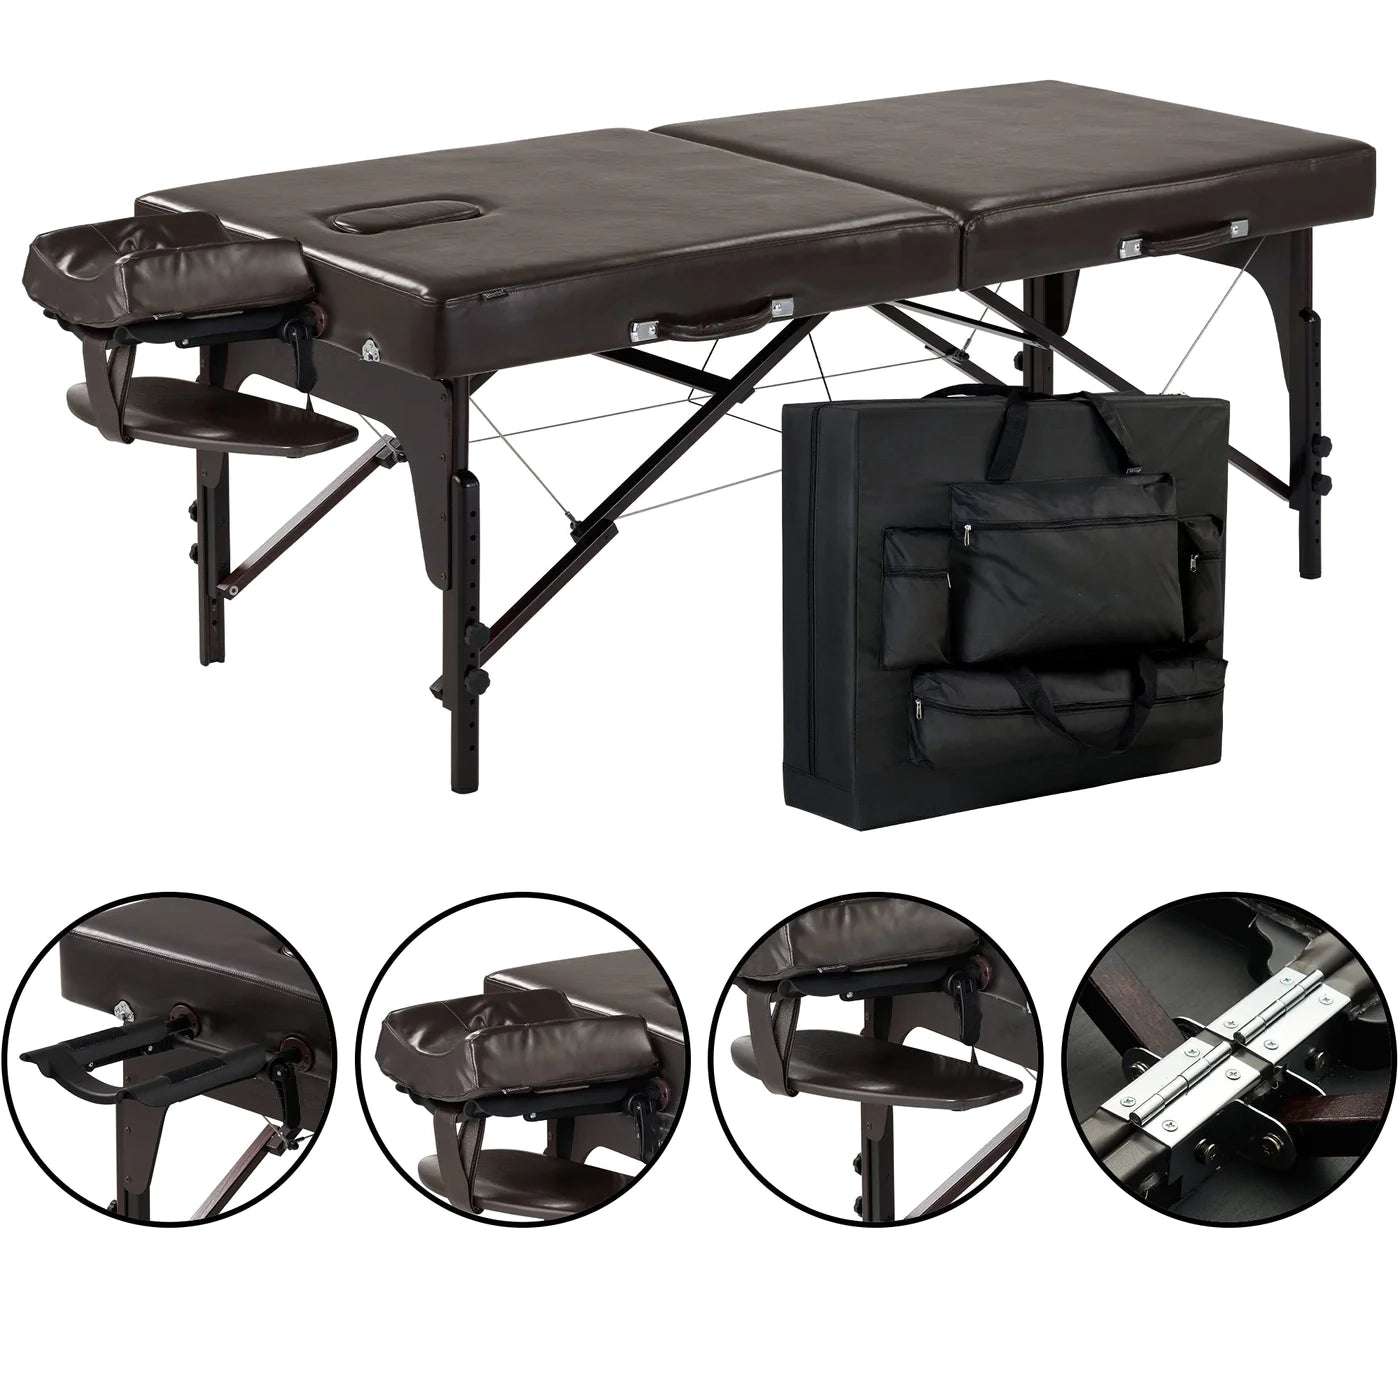 Spabodega 31” SUPREME™ LX Portable Massage Table Package with MEMORY FOAM Layer, Reiki Panels, & Face Port! (Chocolate Italia Color)